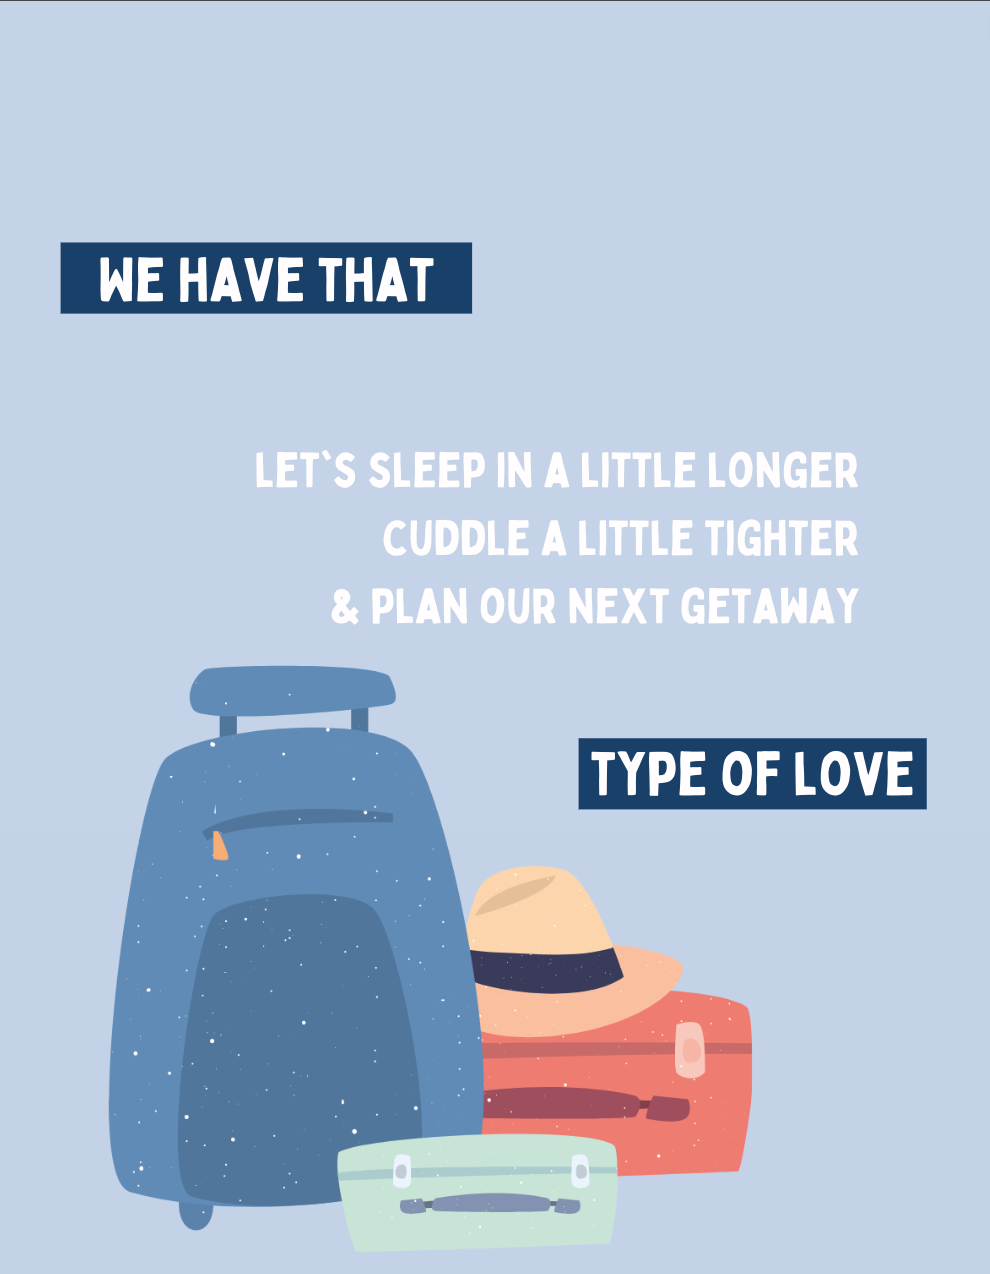 We Have That Plan Our Next Getaway Type of Love